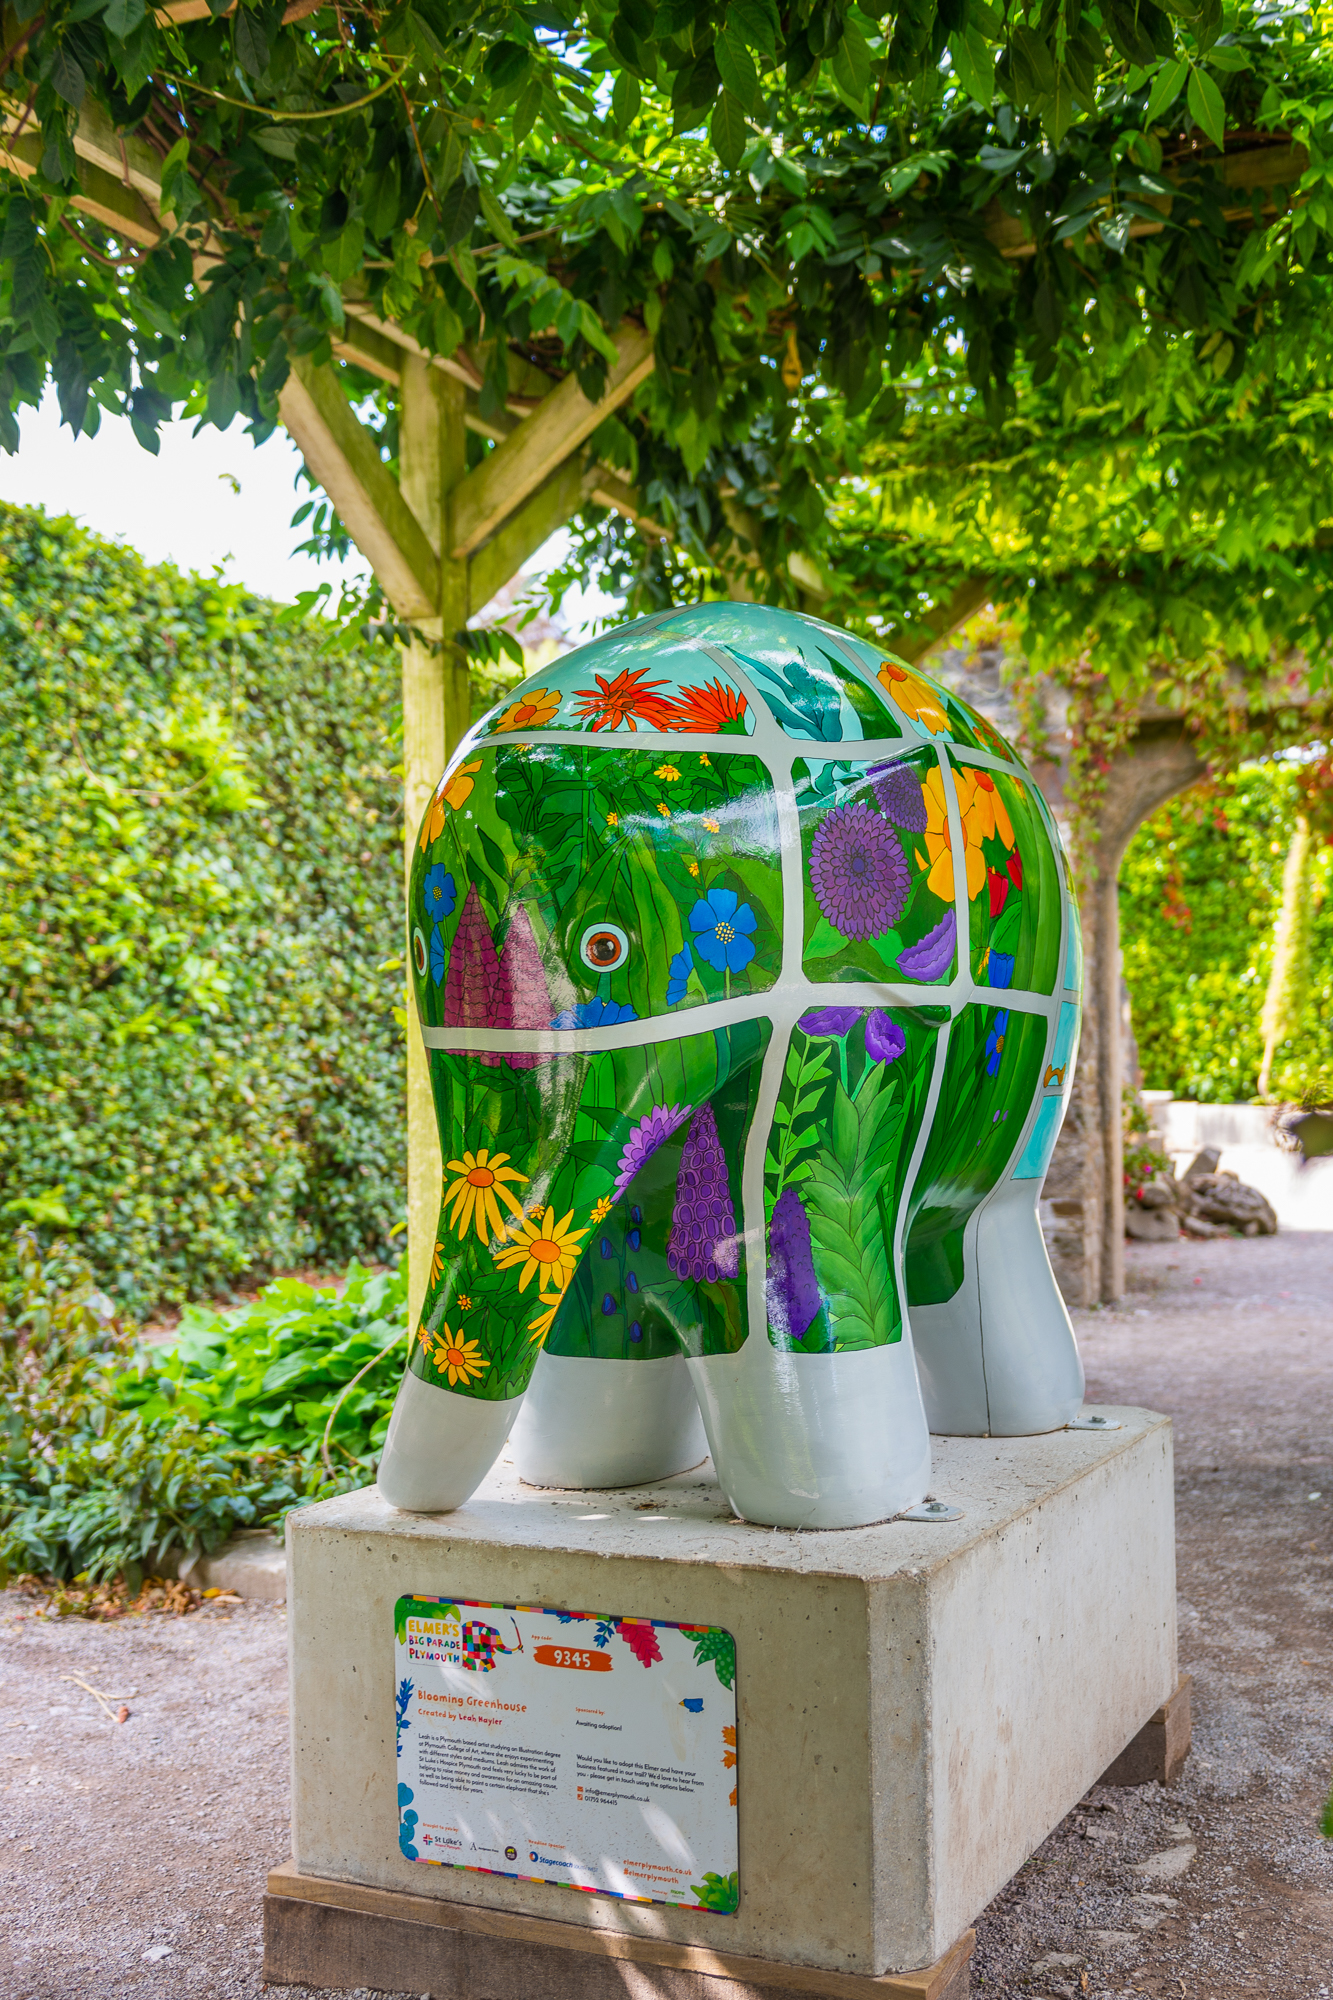 'Blooming Greenhouse' by Leah Hayler. Sponsored by St Luke's Hospice Plymouth - Image 10 of 13